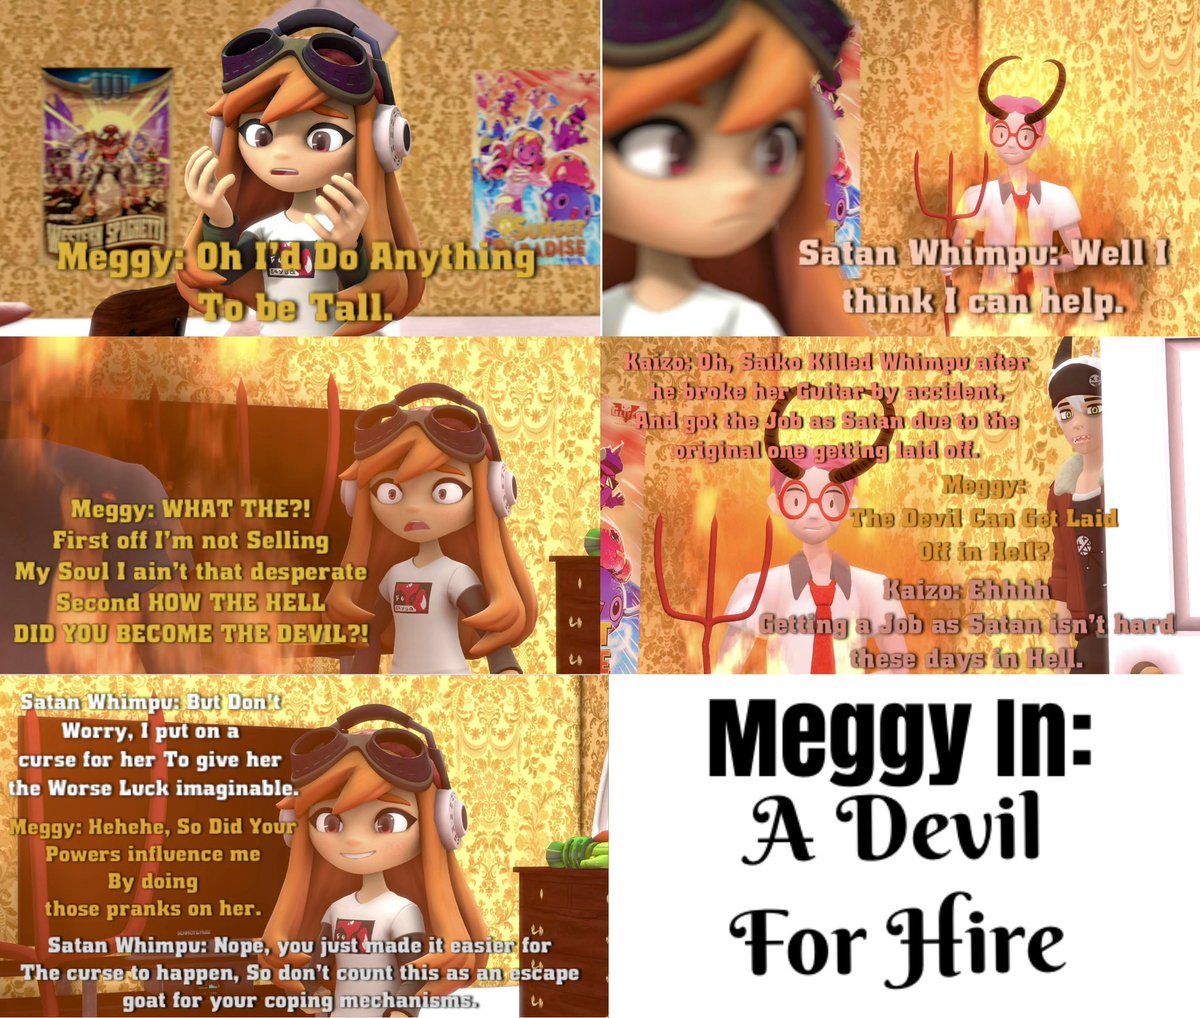 Meggy gets a visit by someone while having an existential crisis

#smg4 #smg4meggy #meggysmg4 #meggyspletzer #smg4kaizo #smg4whimpu